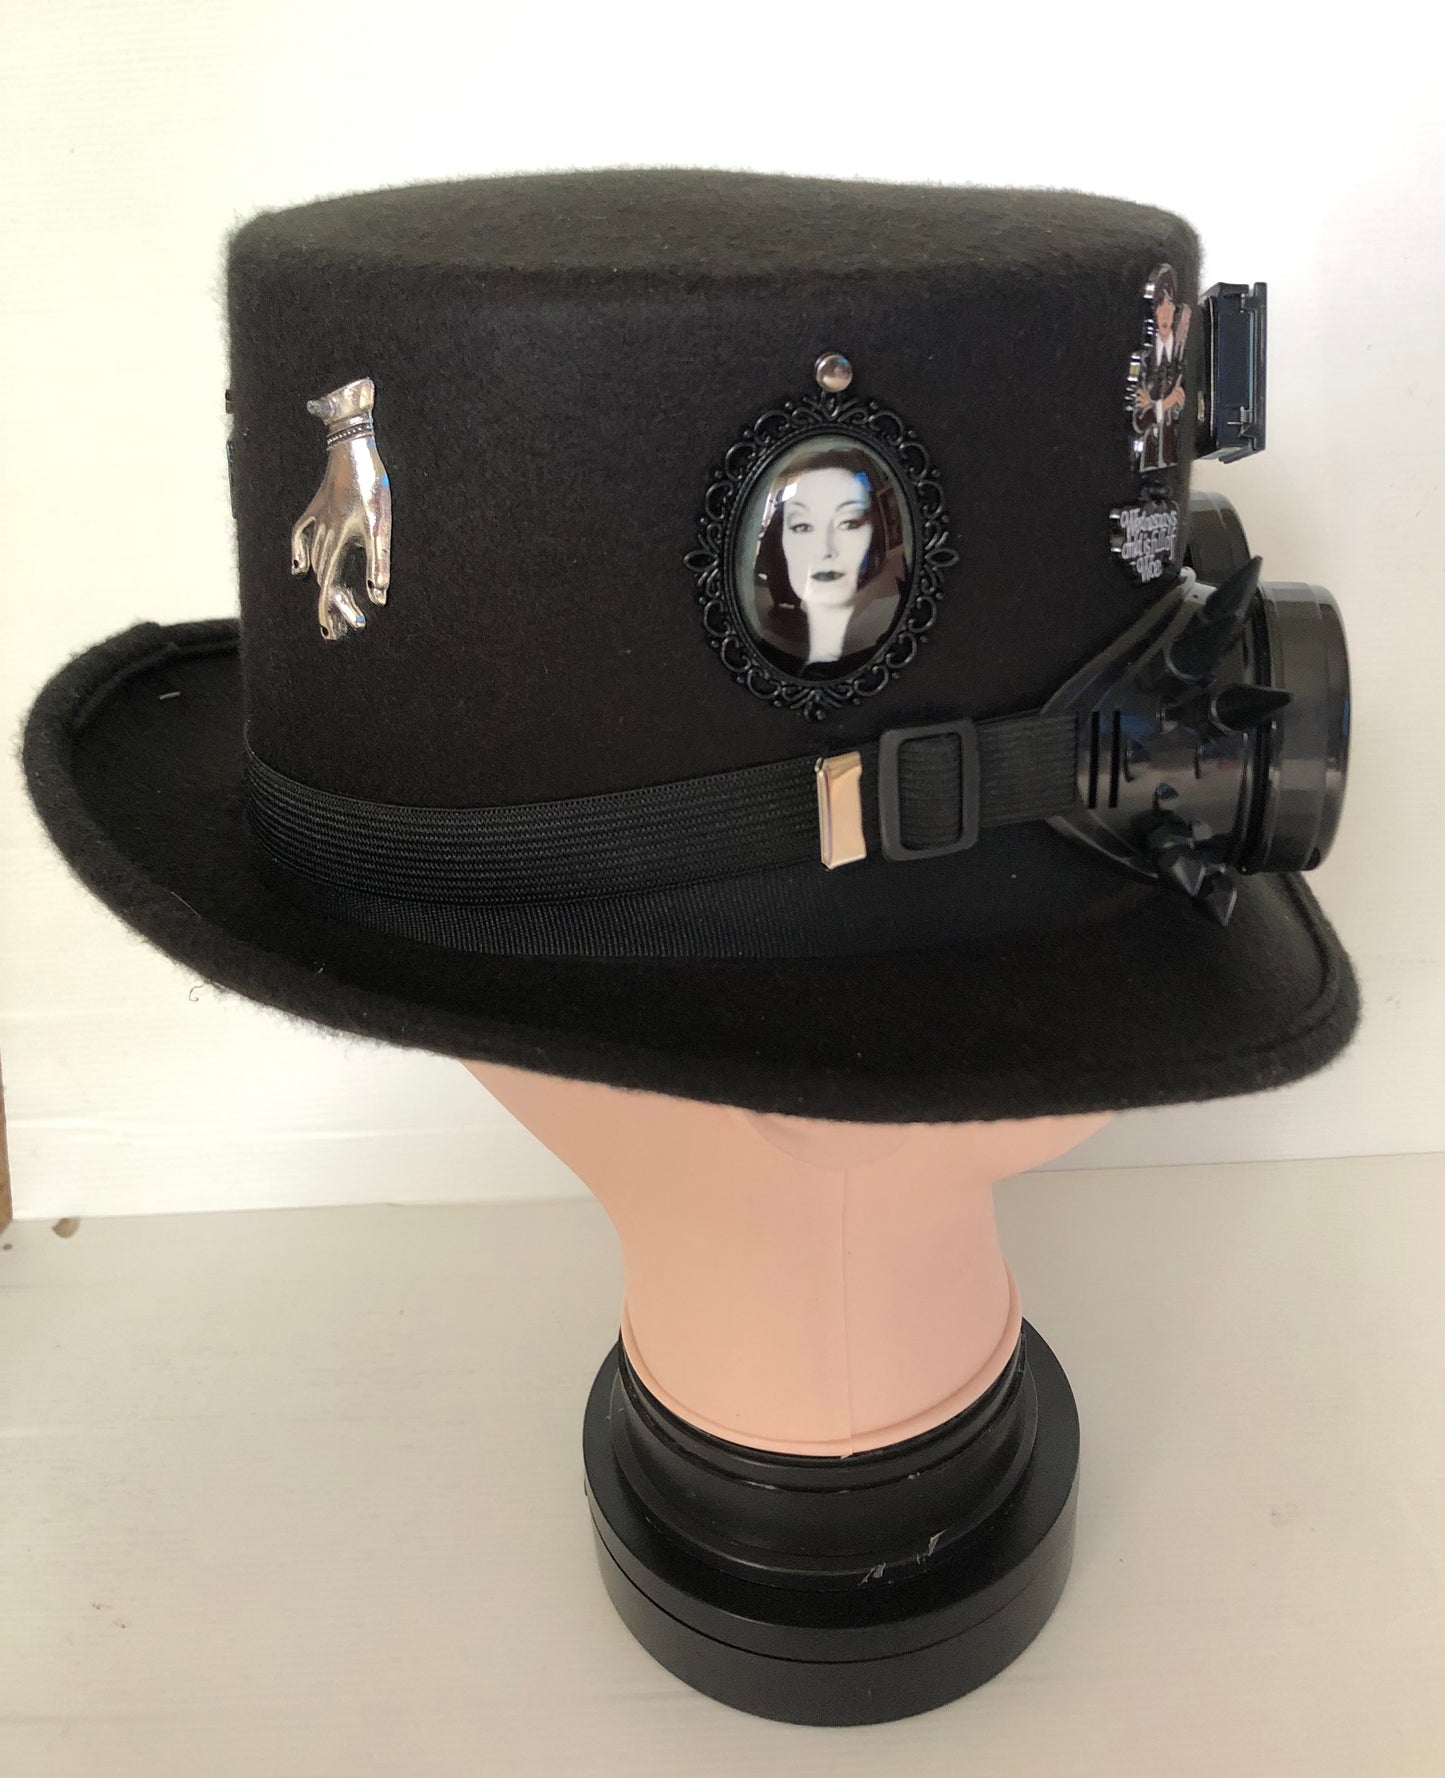 Steampunk Style Hat (Wednesday Adams Theme) with Goggles (Item #422)